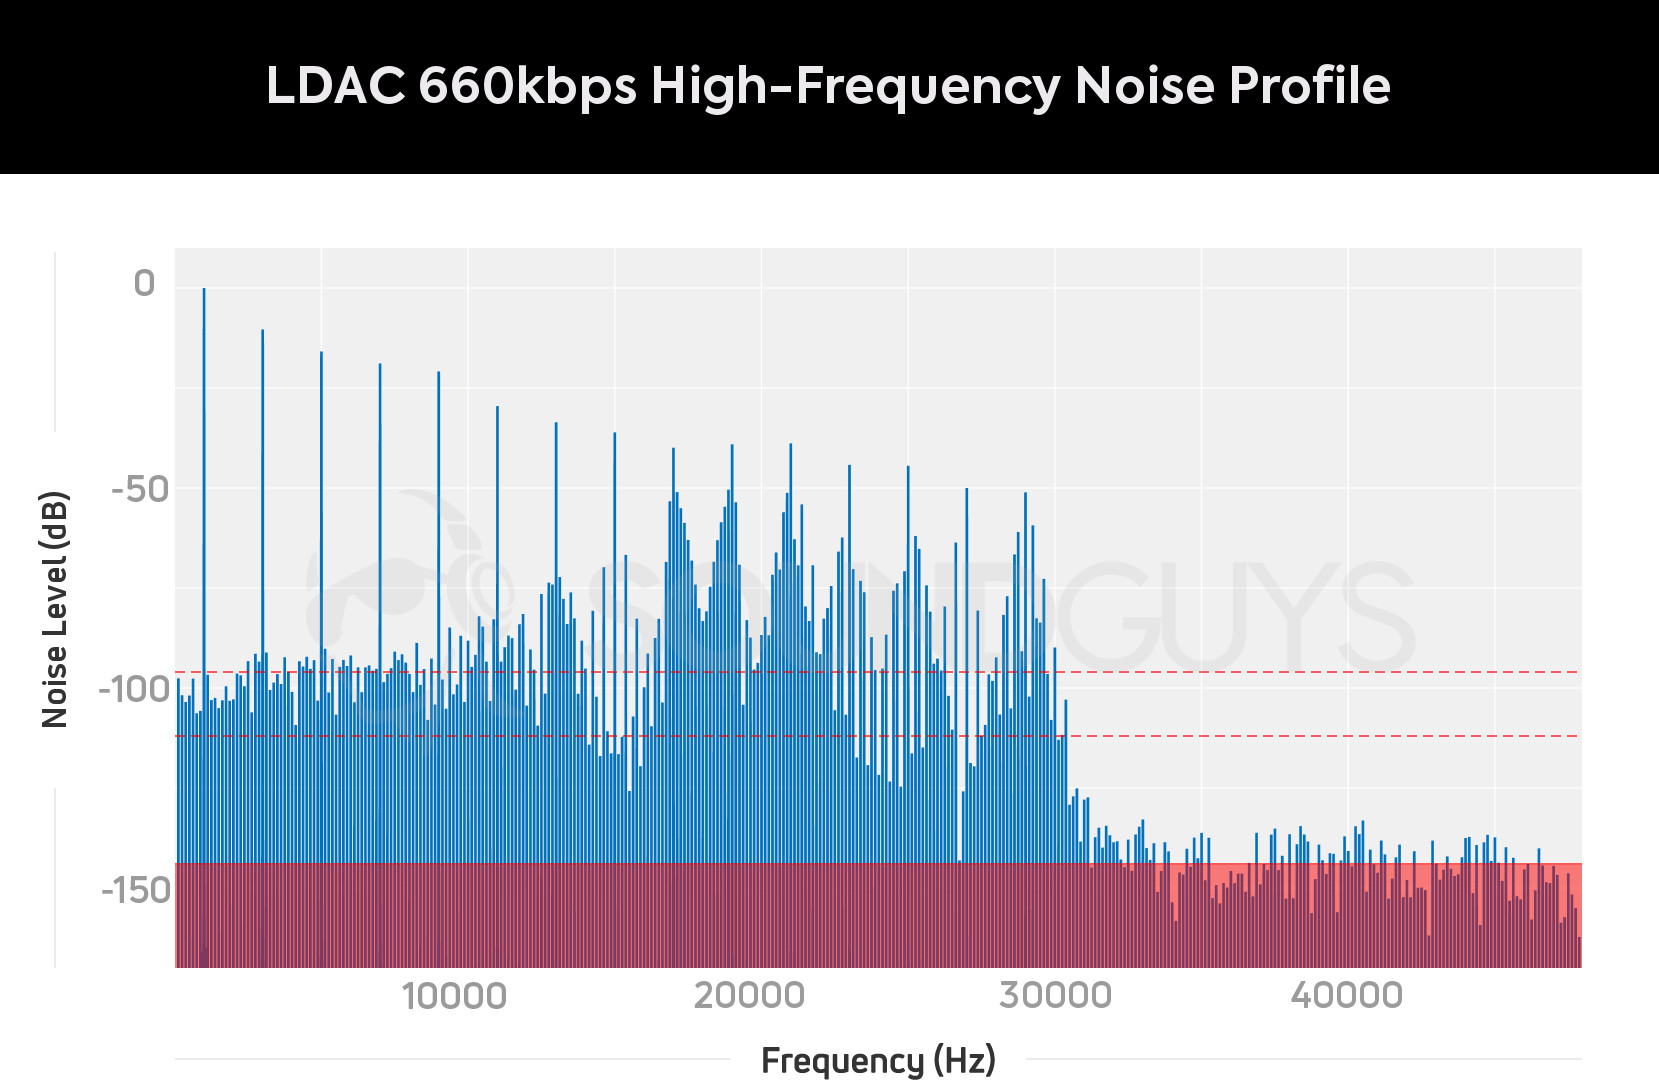 High frequency noise profile of Sony's LDAC at 660kbps